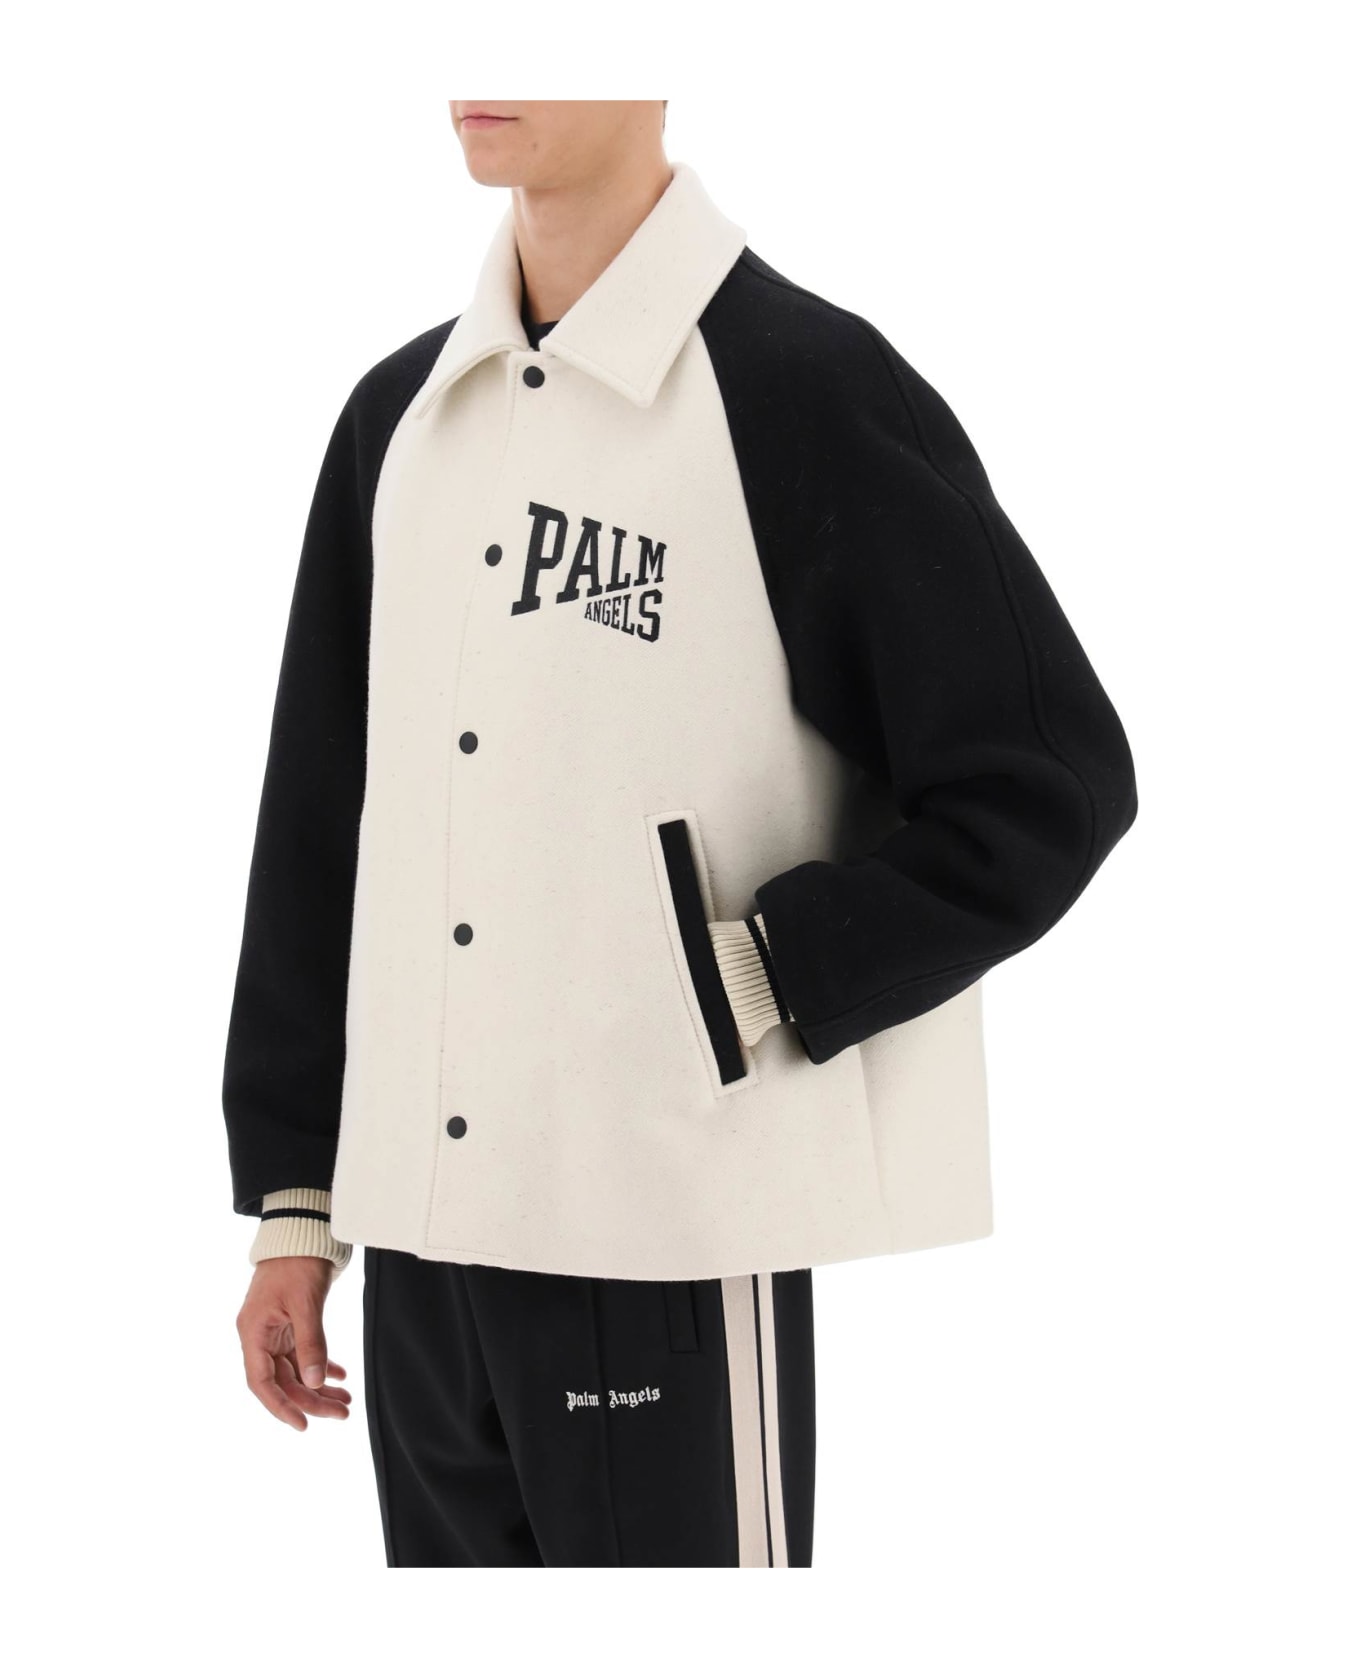 Palm Angels Wool Bomber Jacket - BUTTER BLACK (White)